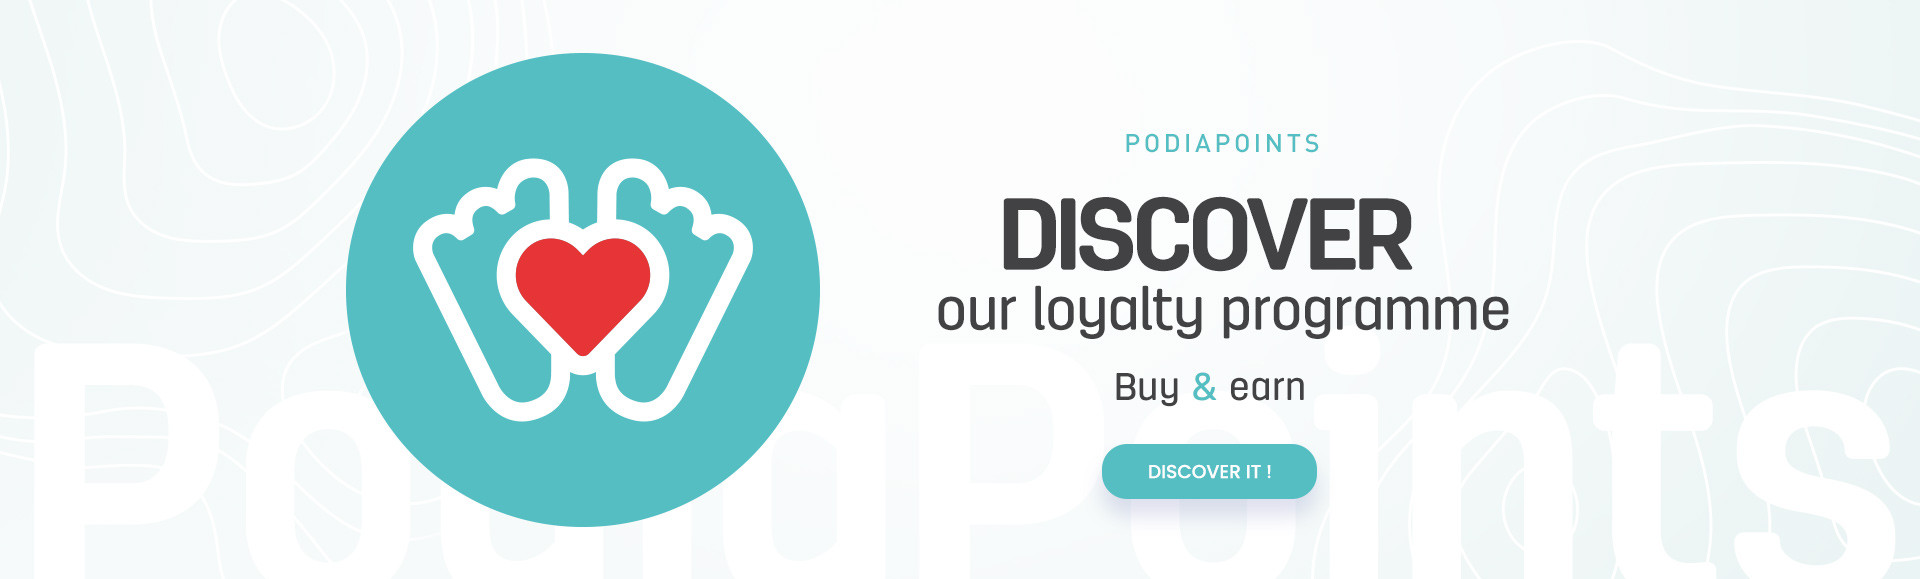 Discover our loyalty programme : Podiapoints